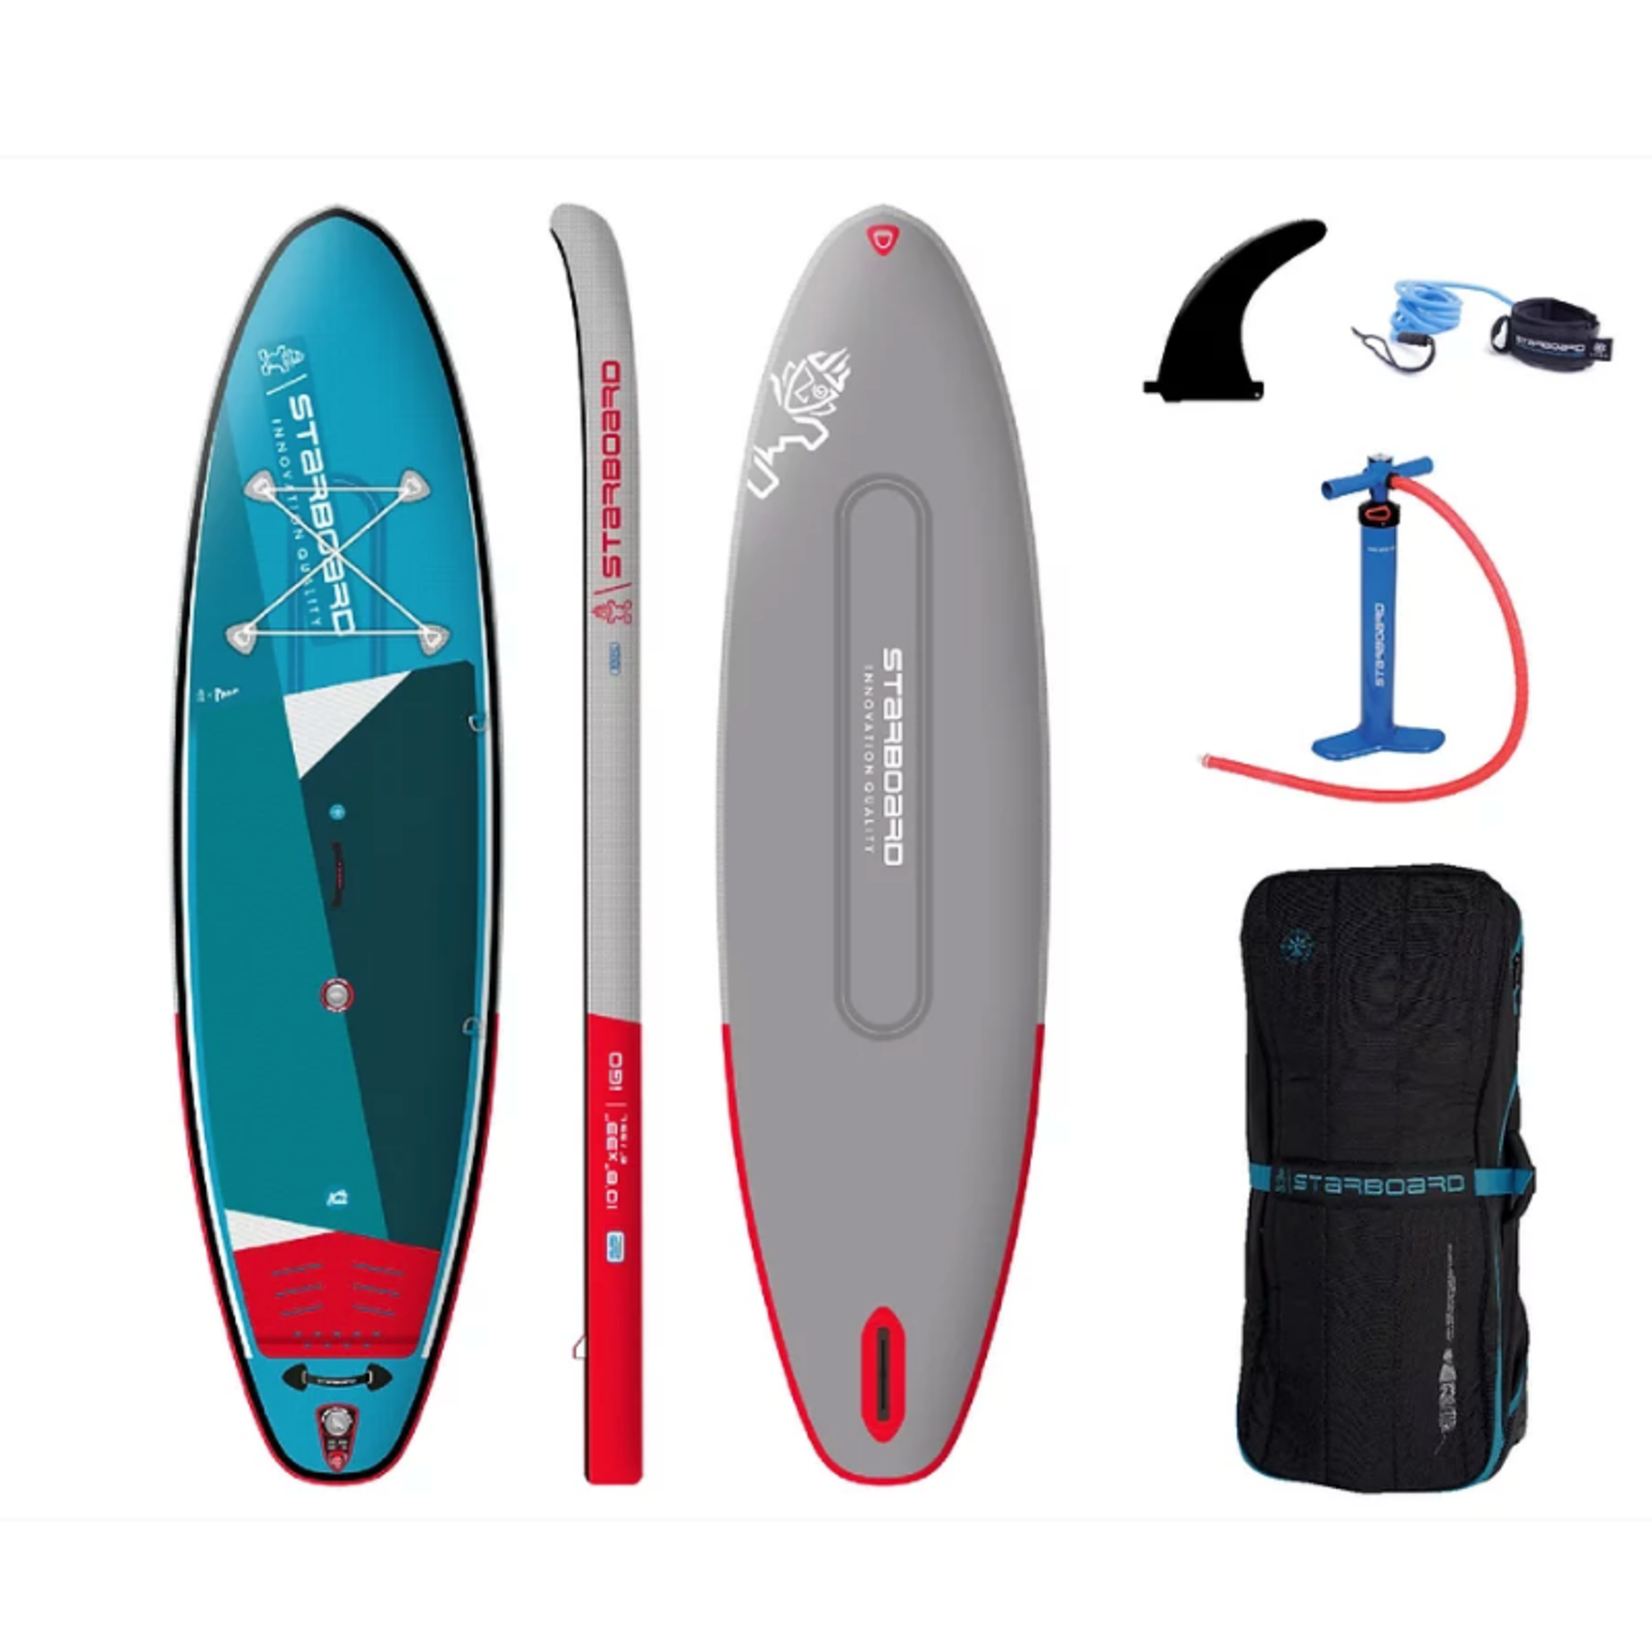 Starboard 2021 Starboard Inflatable SUP 11'2" X 31 iGO ZenSC with Paddle